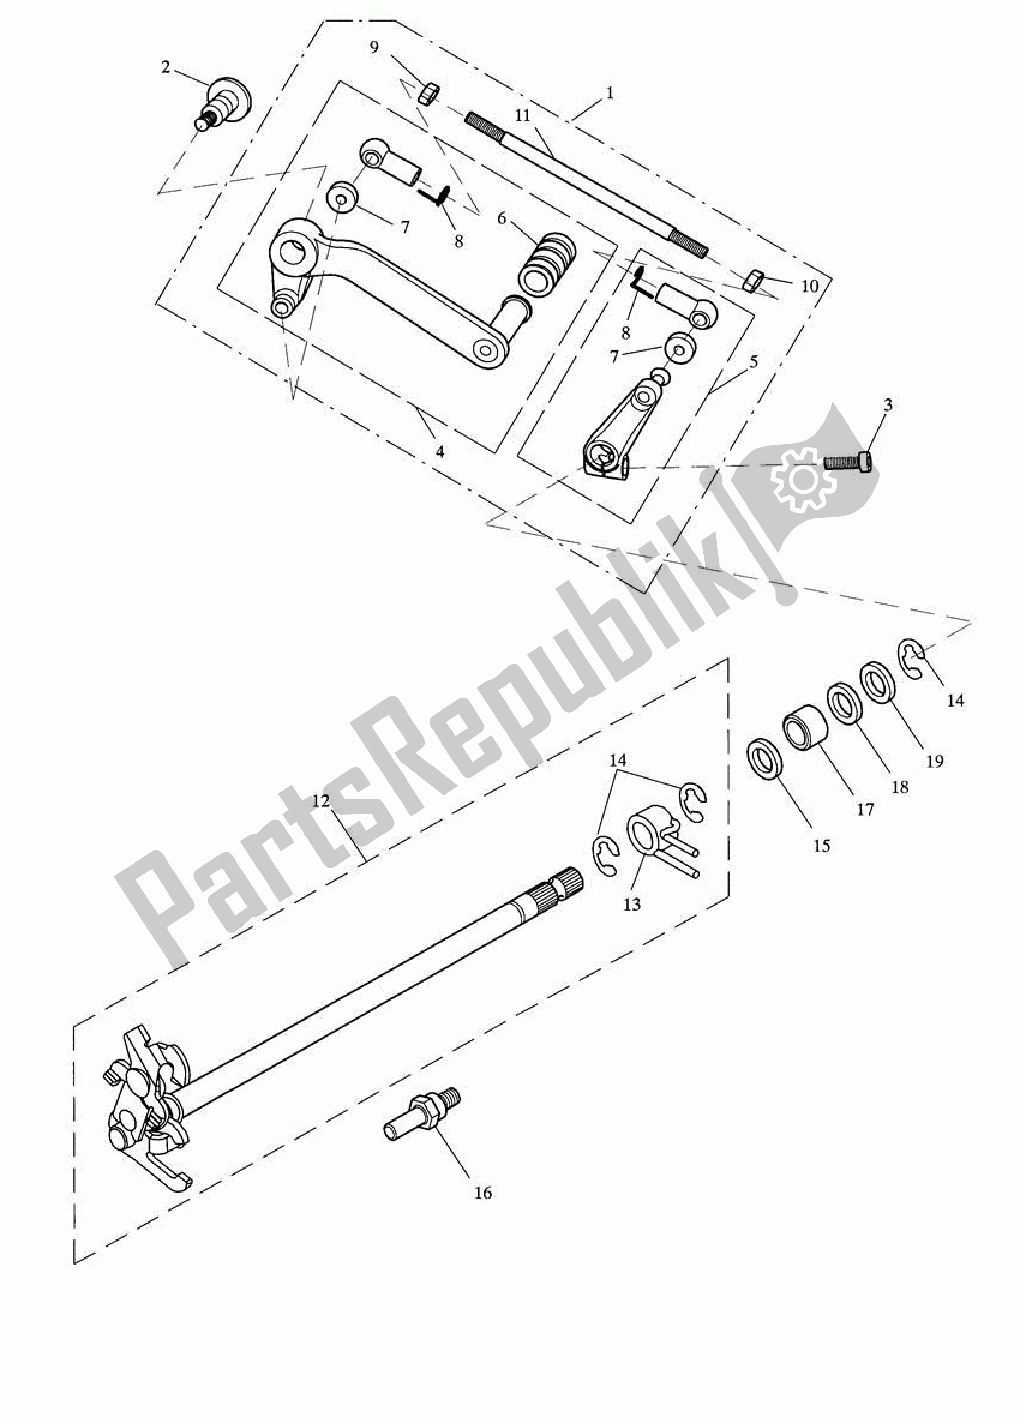 All parts for the Gear Change Mechanism of the Triumph Speed Triple 1050 2008 - 2012